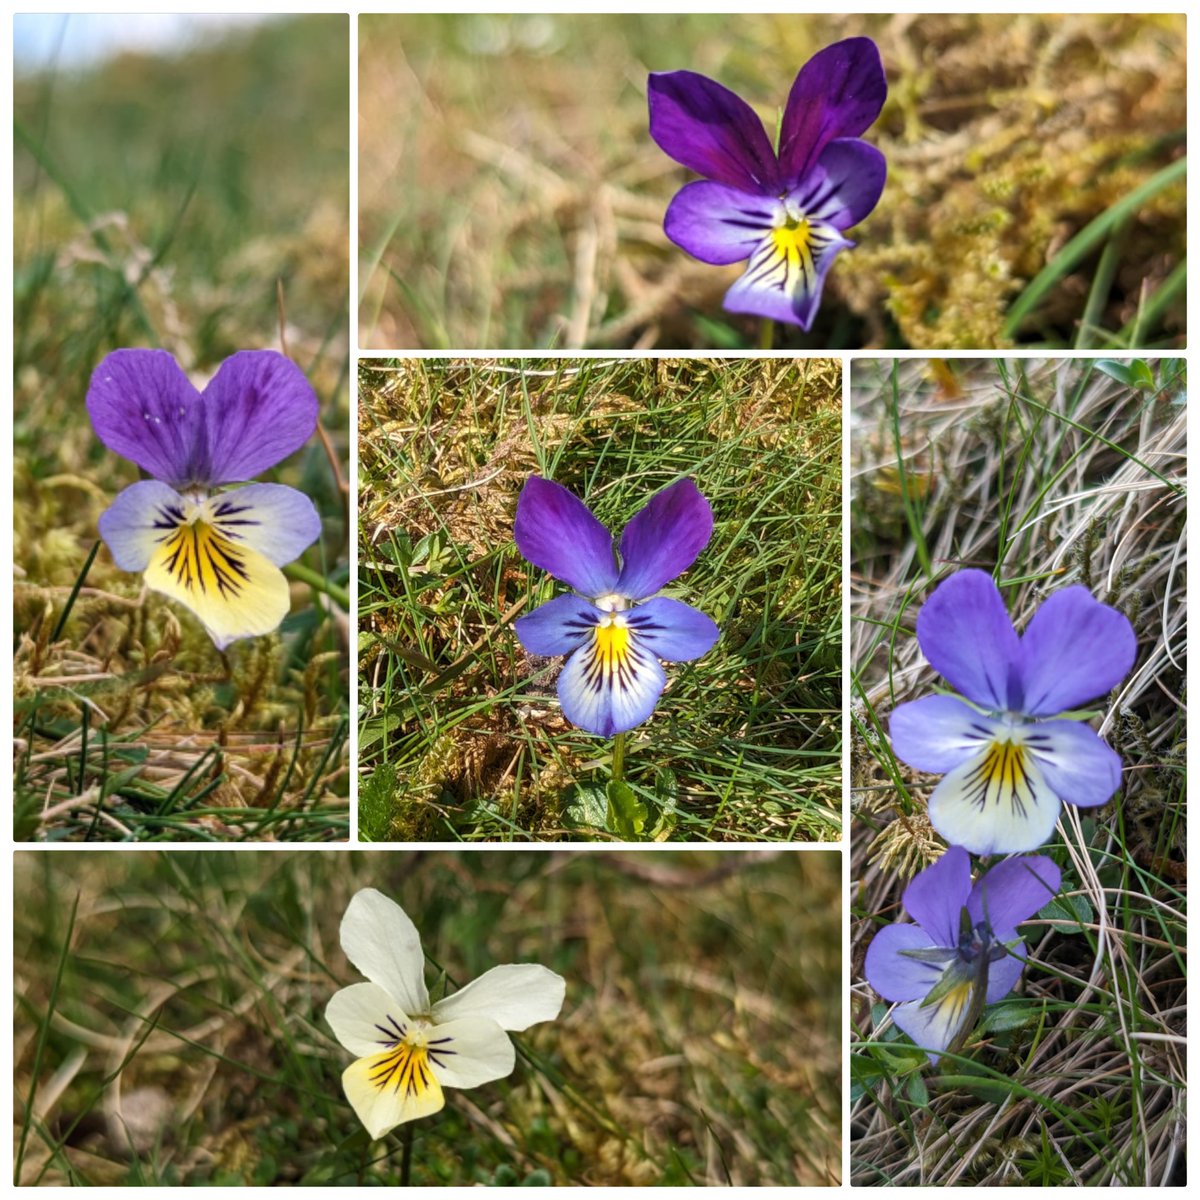 A bit of Mountain Pansy appreciation for this week's #wildflowerhour. So many lovely variations to be seen.